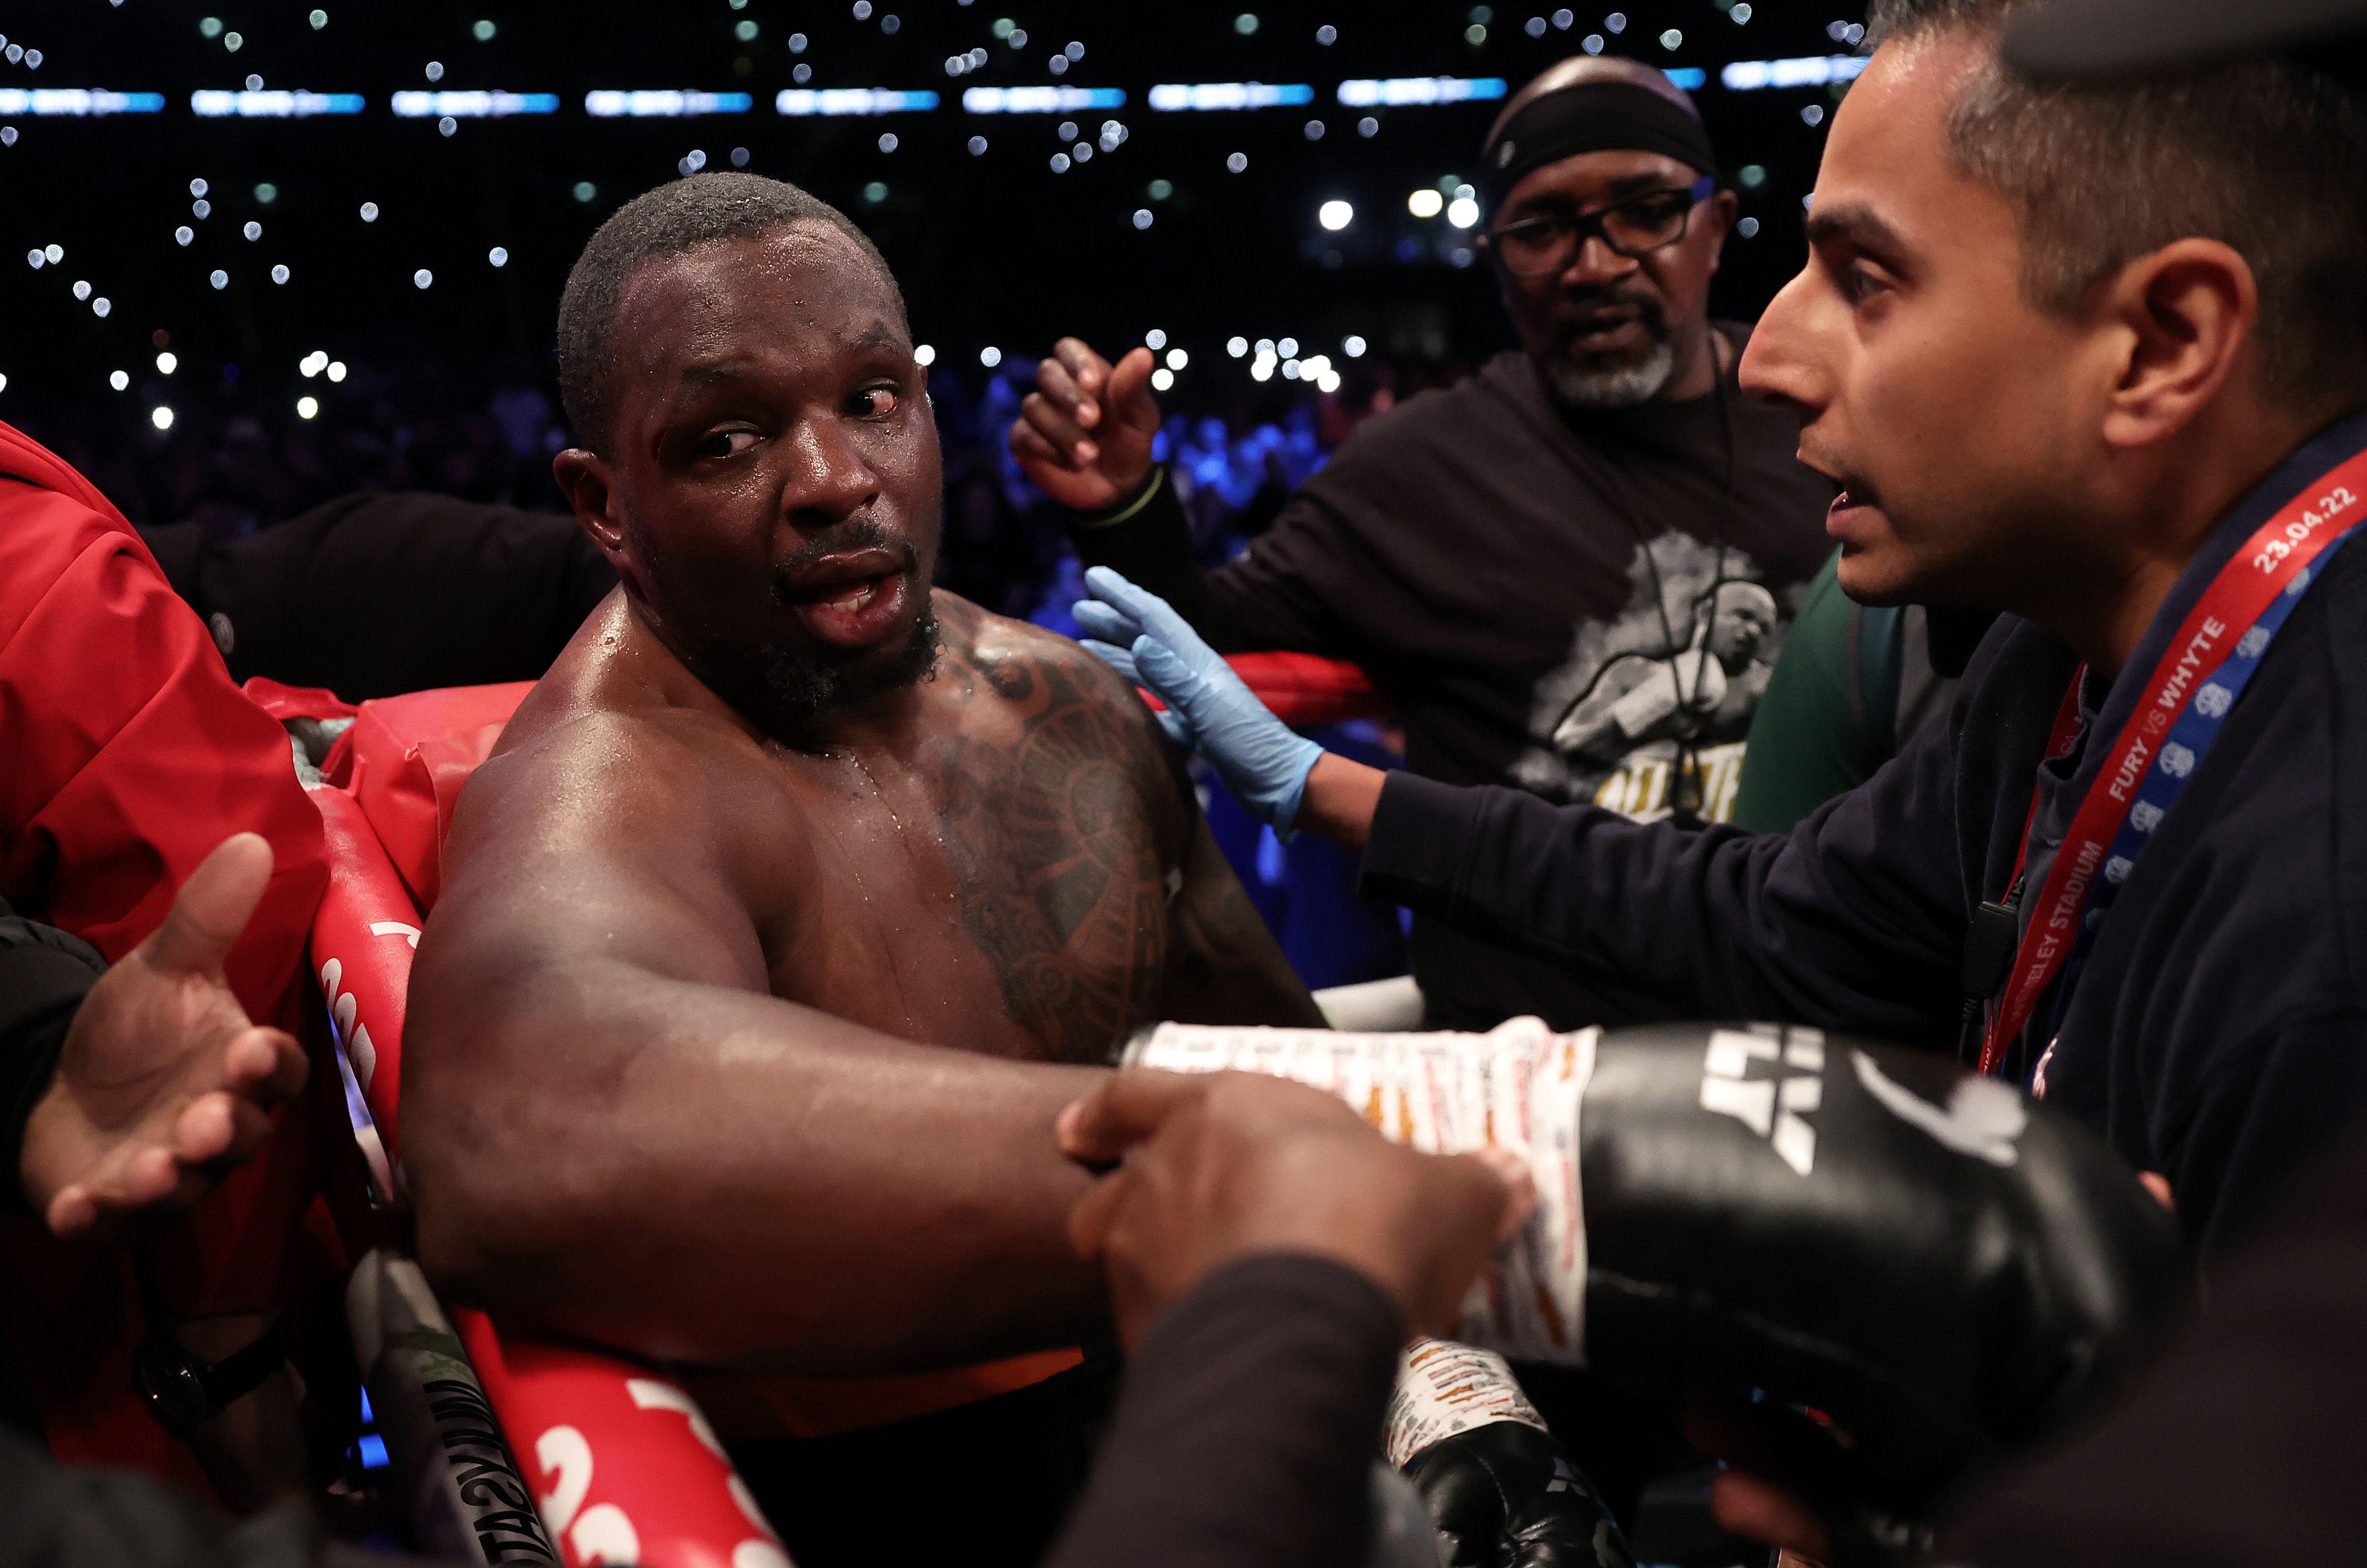 Dillian Whyte not happy with Fury's KO